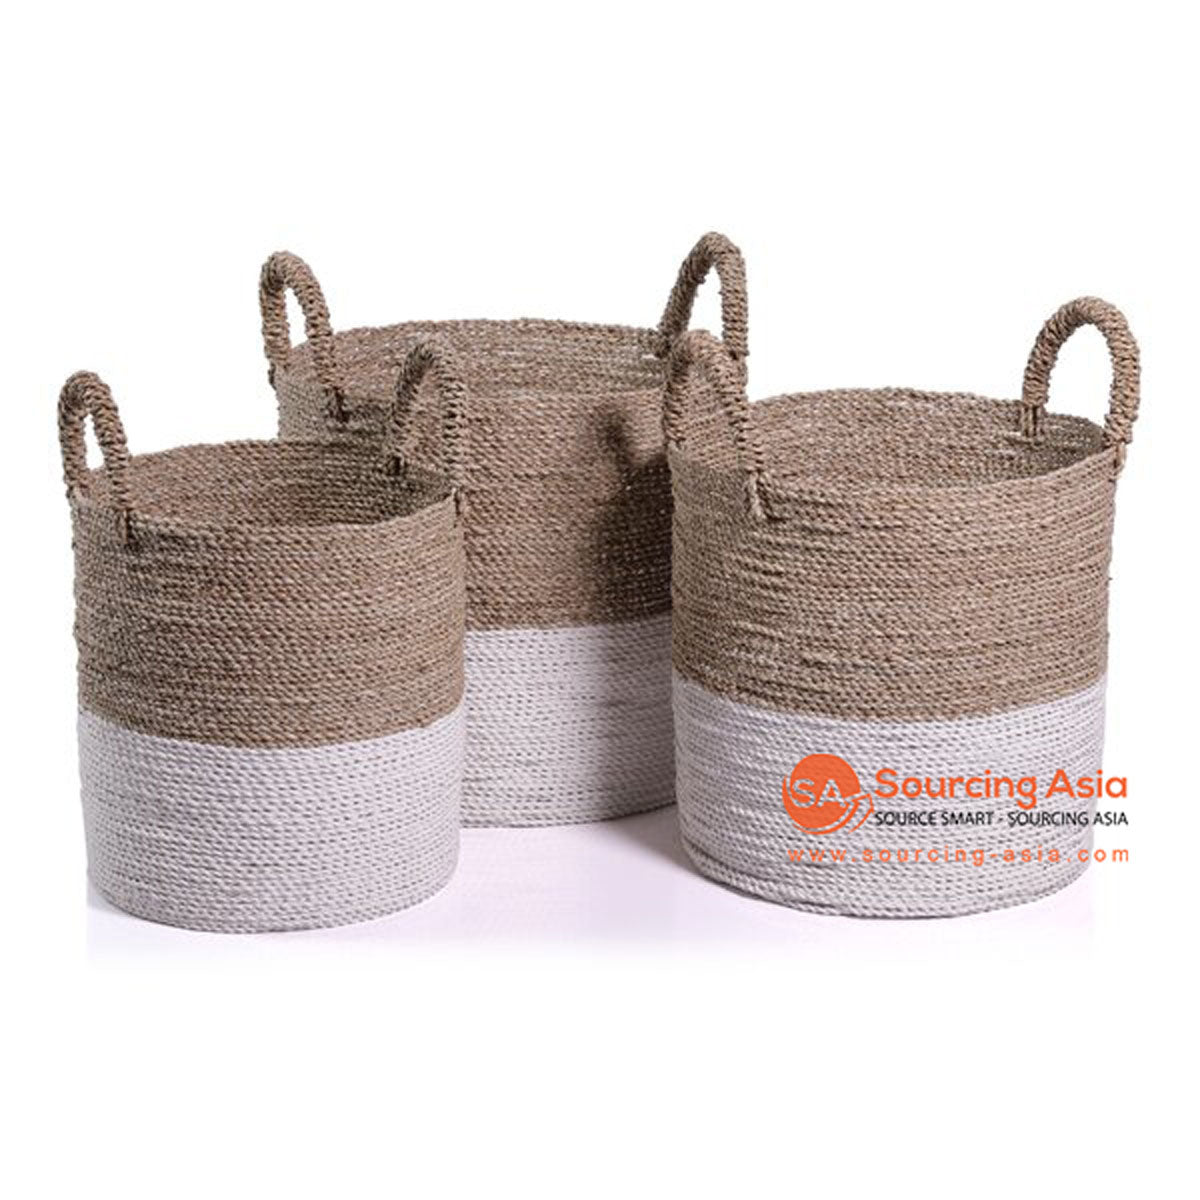 SHL057-8 SET OF THREE NATURAL AND WHITE SEAGRASS BASKETS WITH MACRAME DECORATION